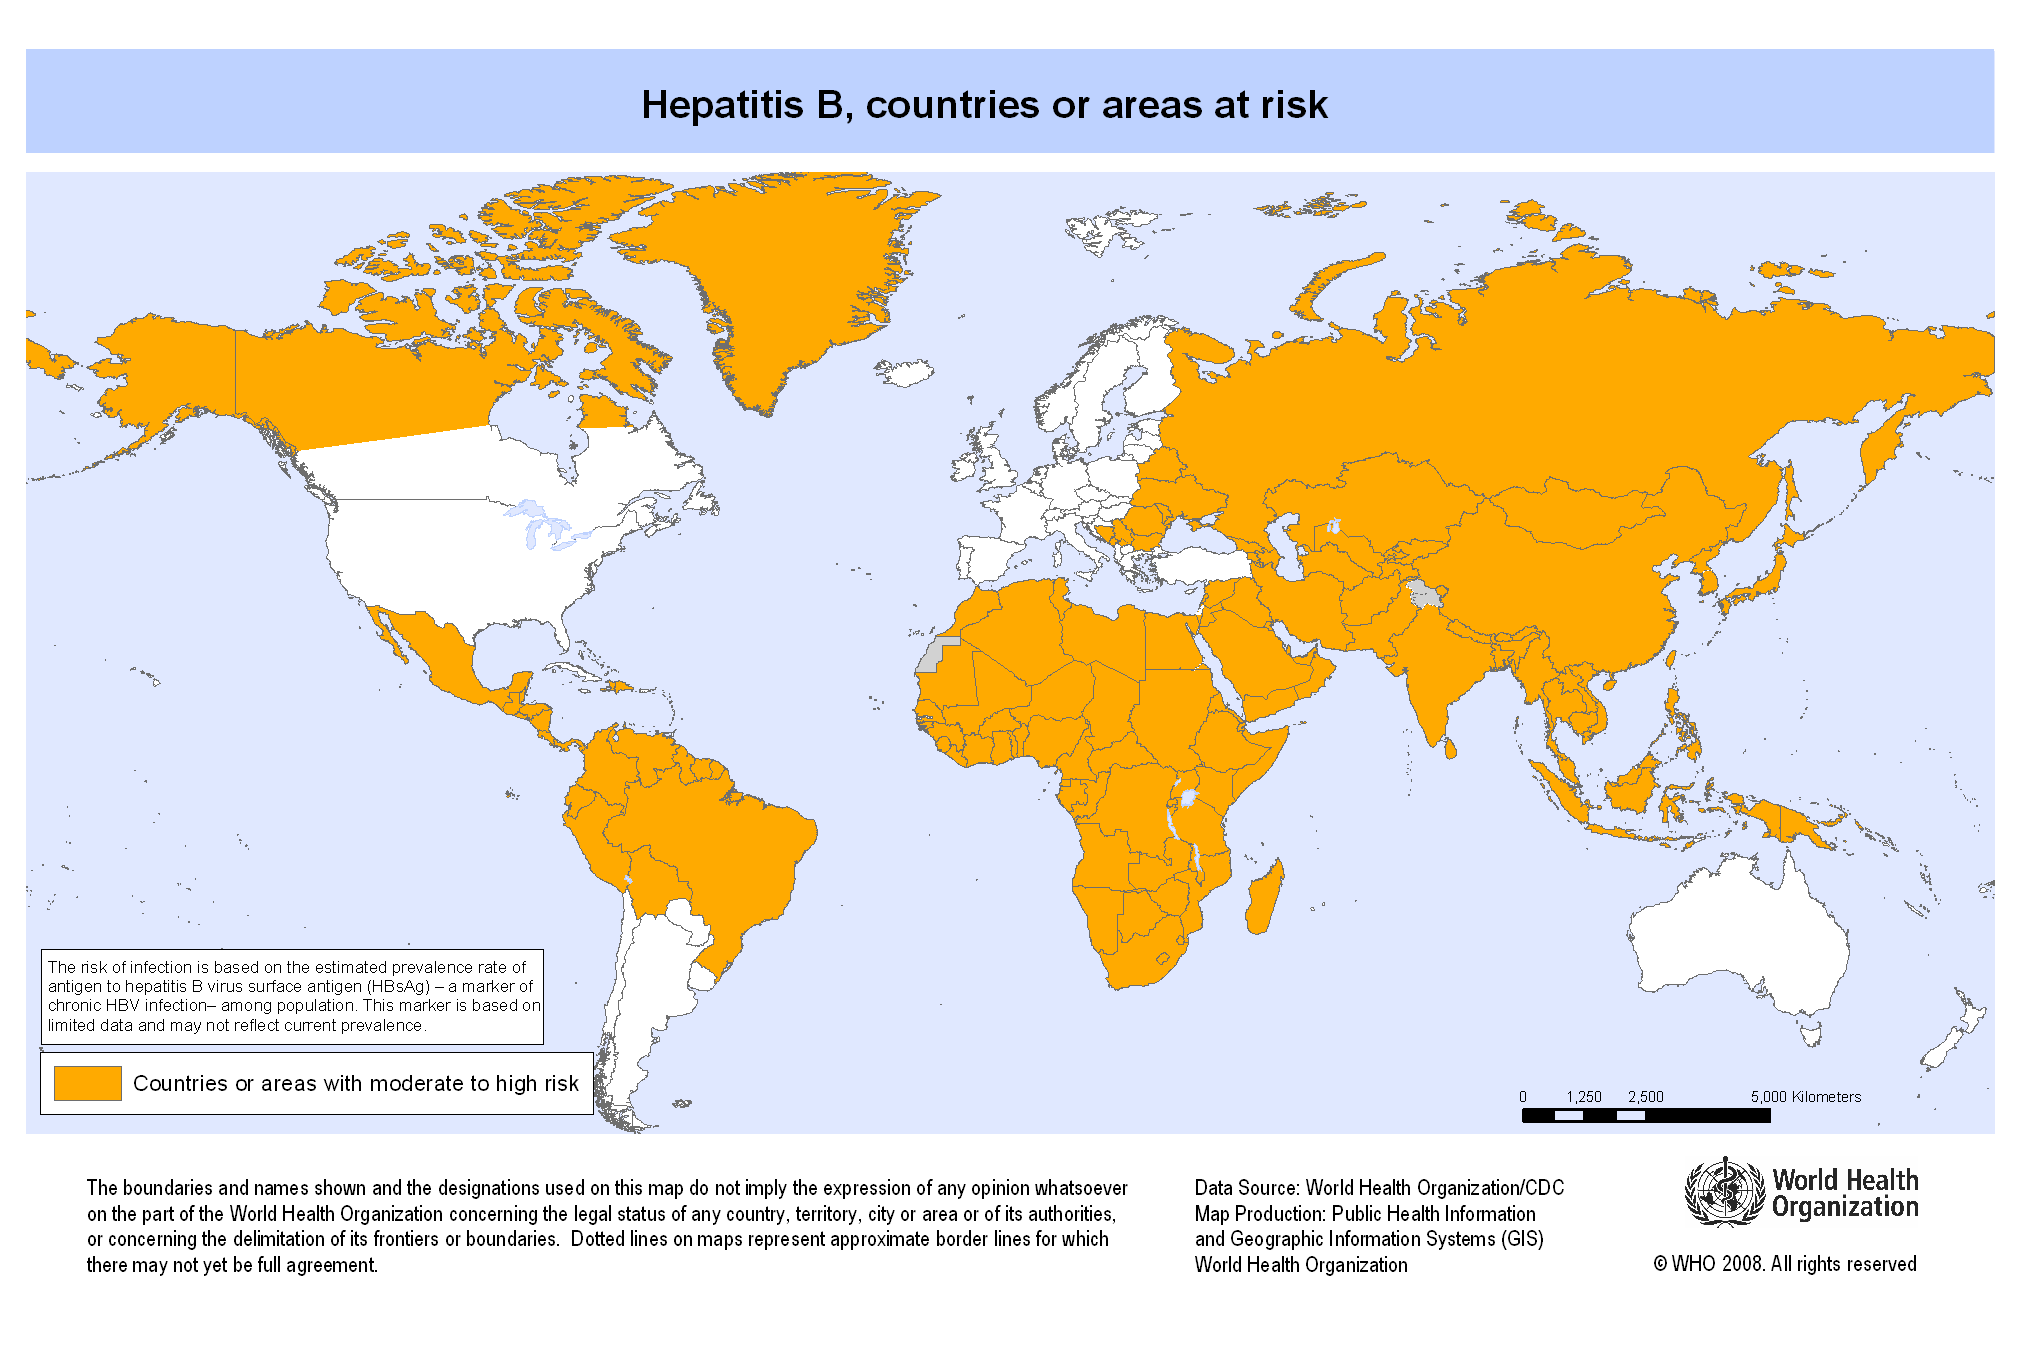 Areas of risk for Hepatitis B